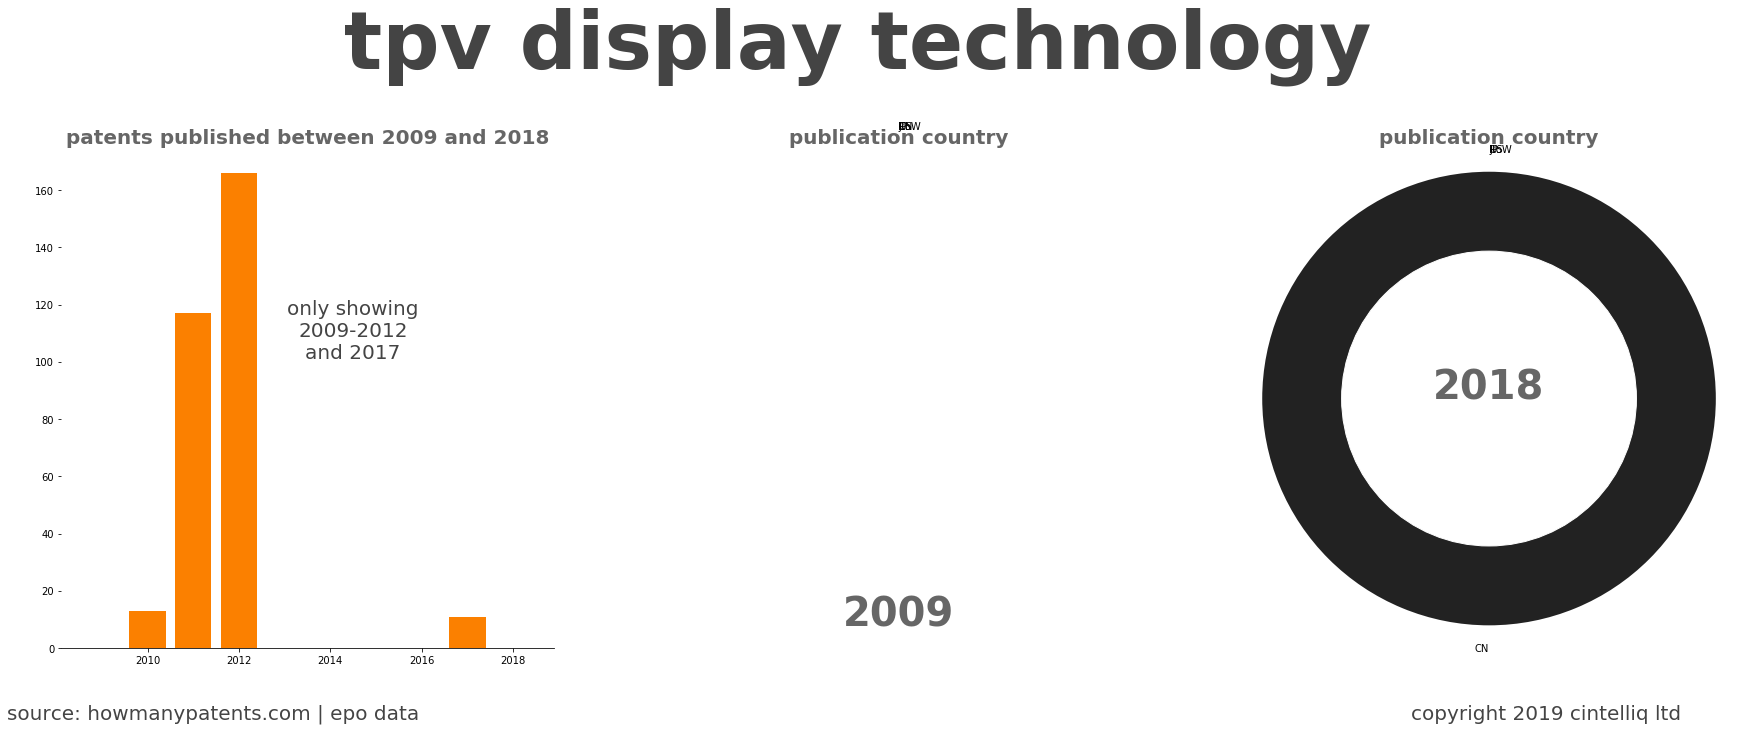 summary of patents for Tpv Display Technology 